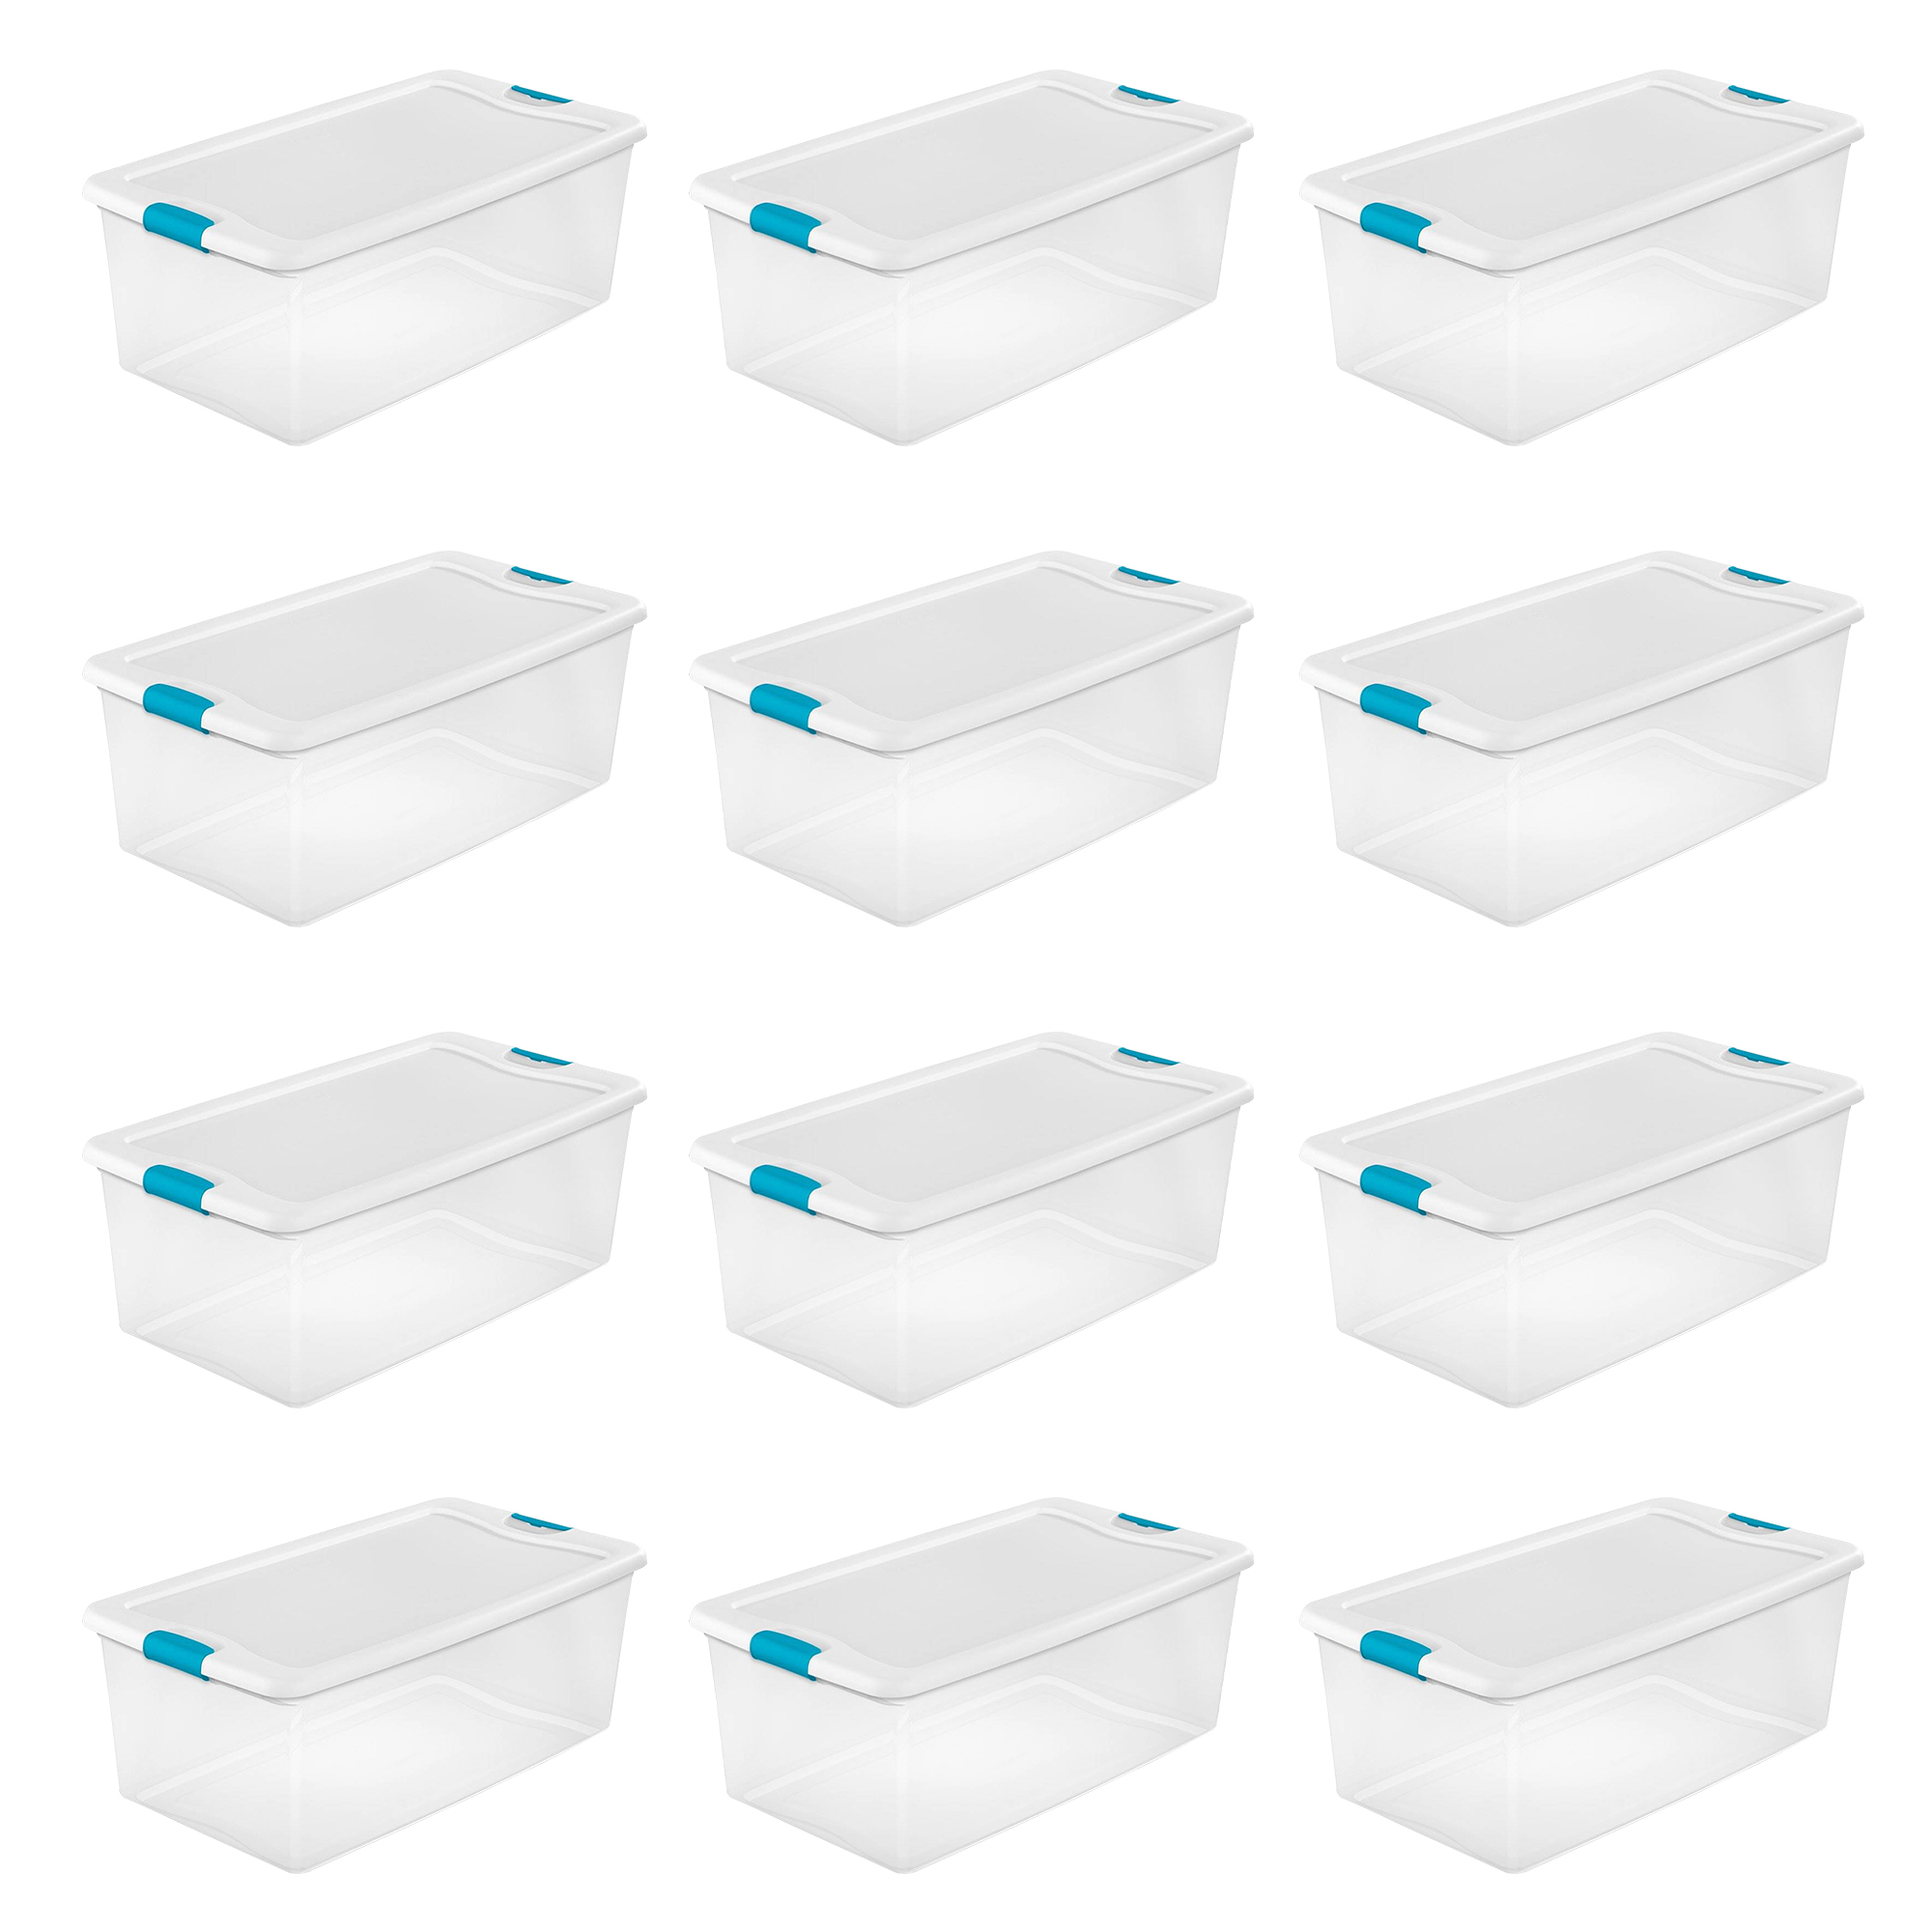 Sterilite 106 Quart Clear Plastic Storage Bin with White Latch Lid, 12 Pack - image 1 of 11